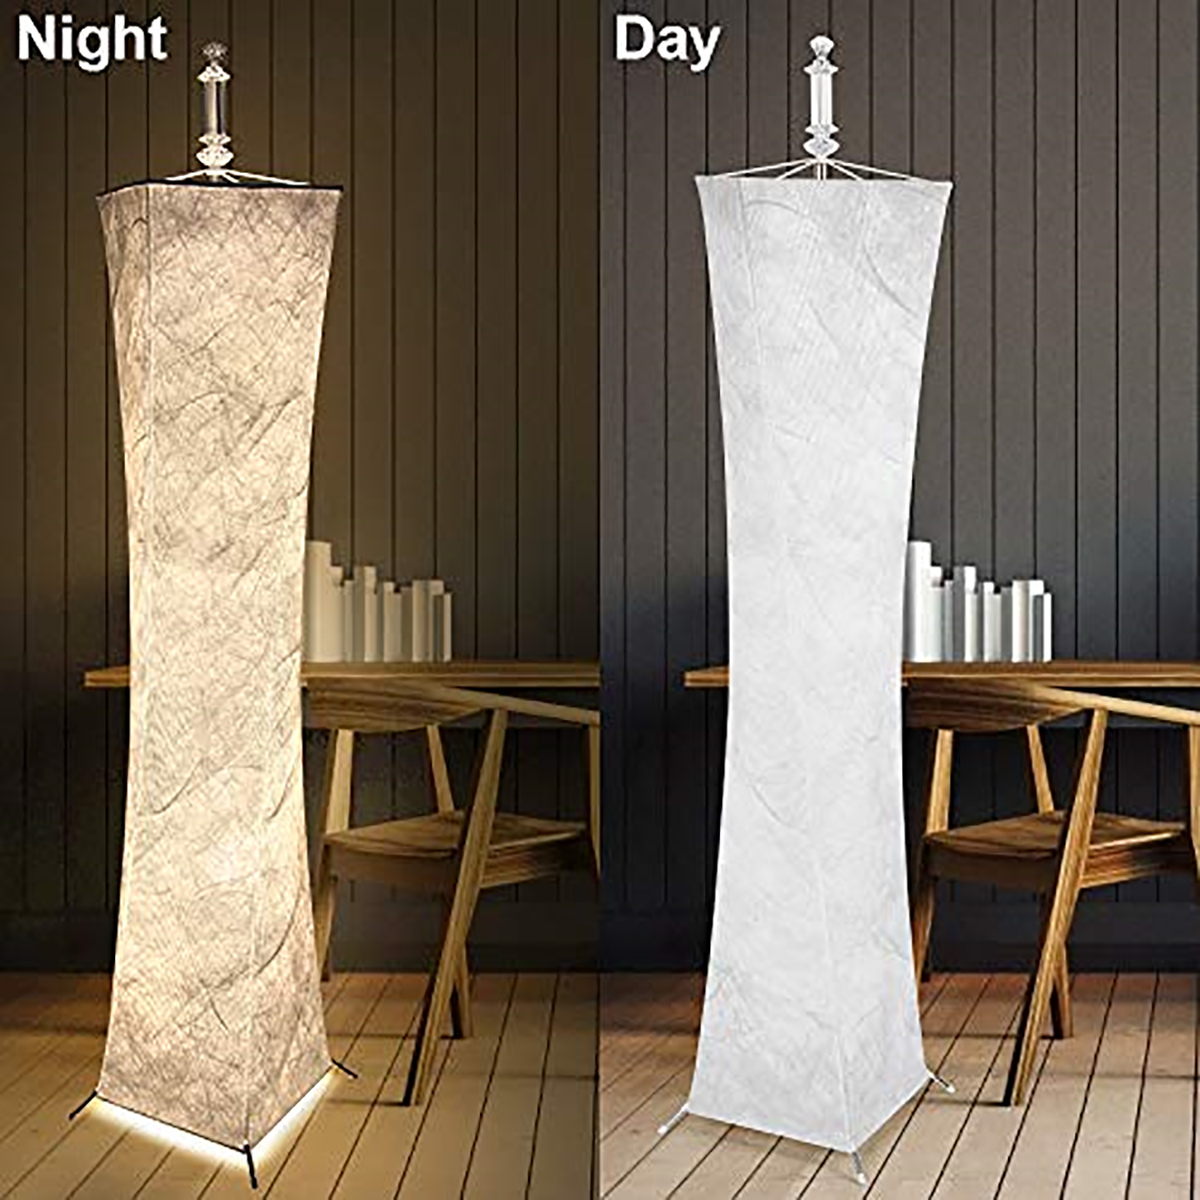 12V-LED-Floor-Lamp-Remote-Control-RGB-Color-Changing-58quot-Height-Bulbs-for-Livingroomish-1806500-8